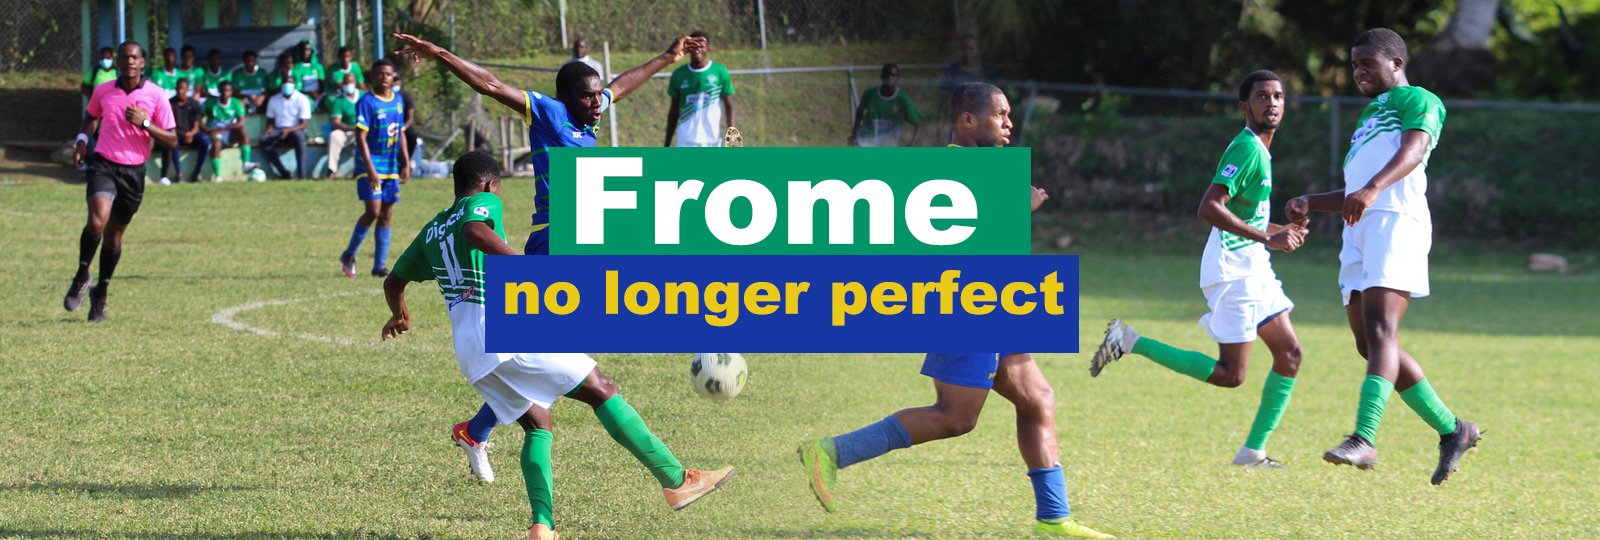 Frome no longer perfect